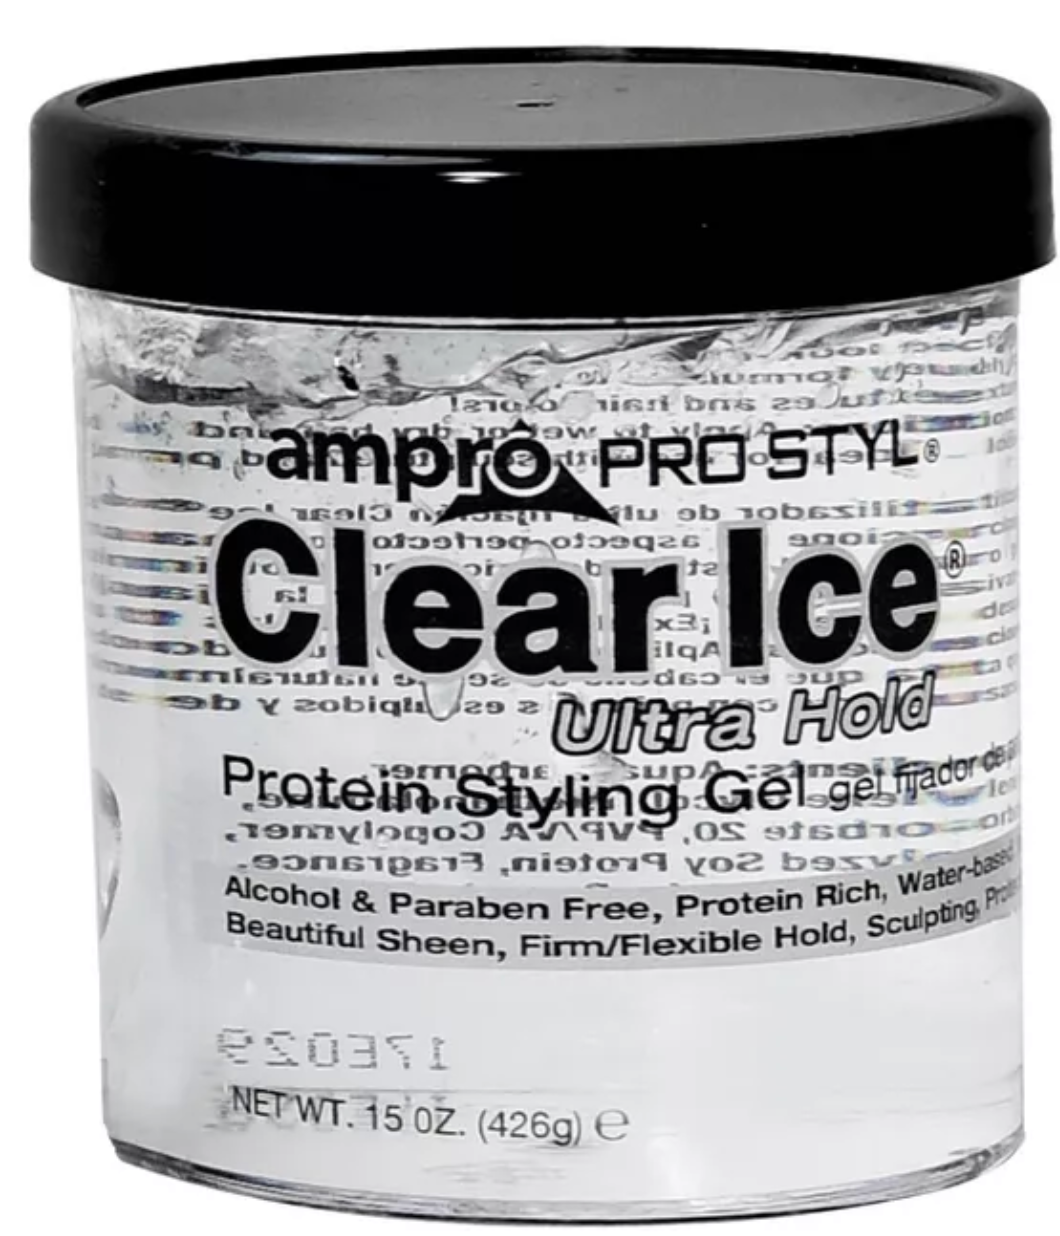 Ampro Pro Protein Styling Clear Gel